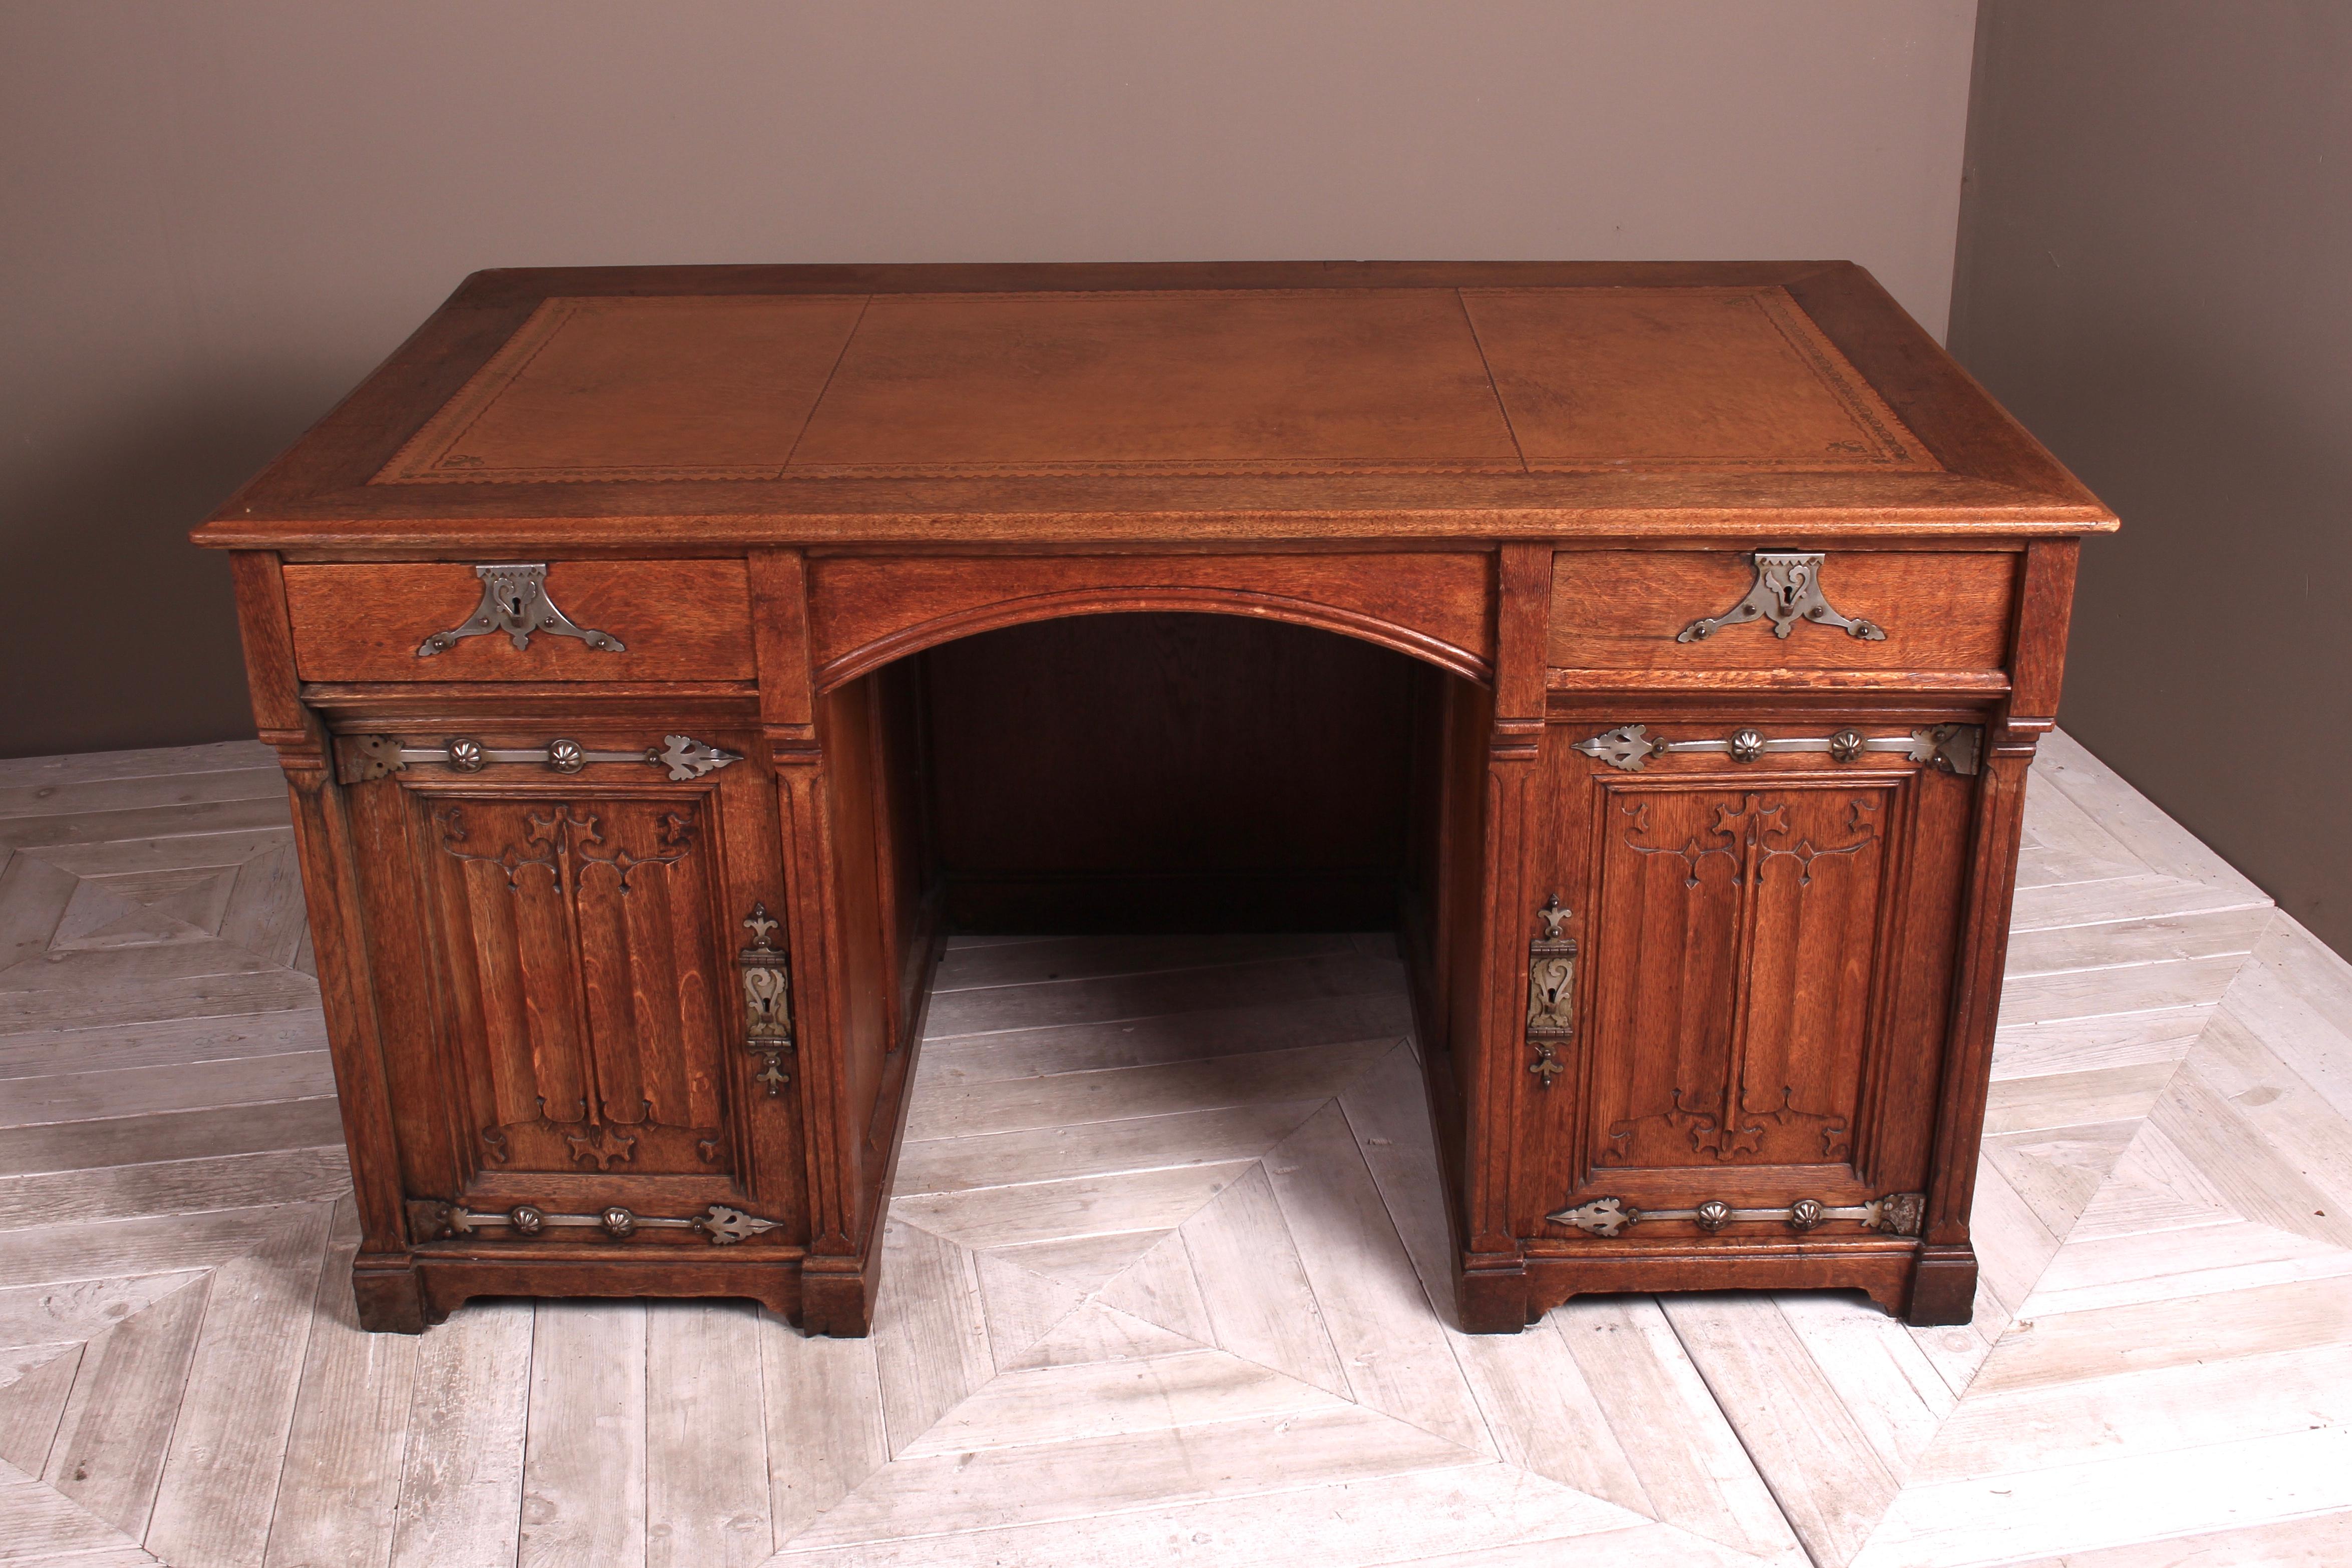 A beautiful Victorian Gothic Revival oak desk in the manner of Pugin, circa 1880. The desk having a tooled tan leather writing top above a central arched kneehole opening. Flanked to each side by drawers and cupboards with enclosed shelf. The doors